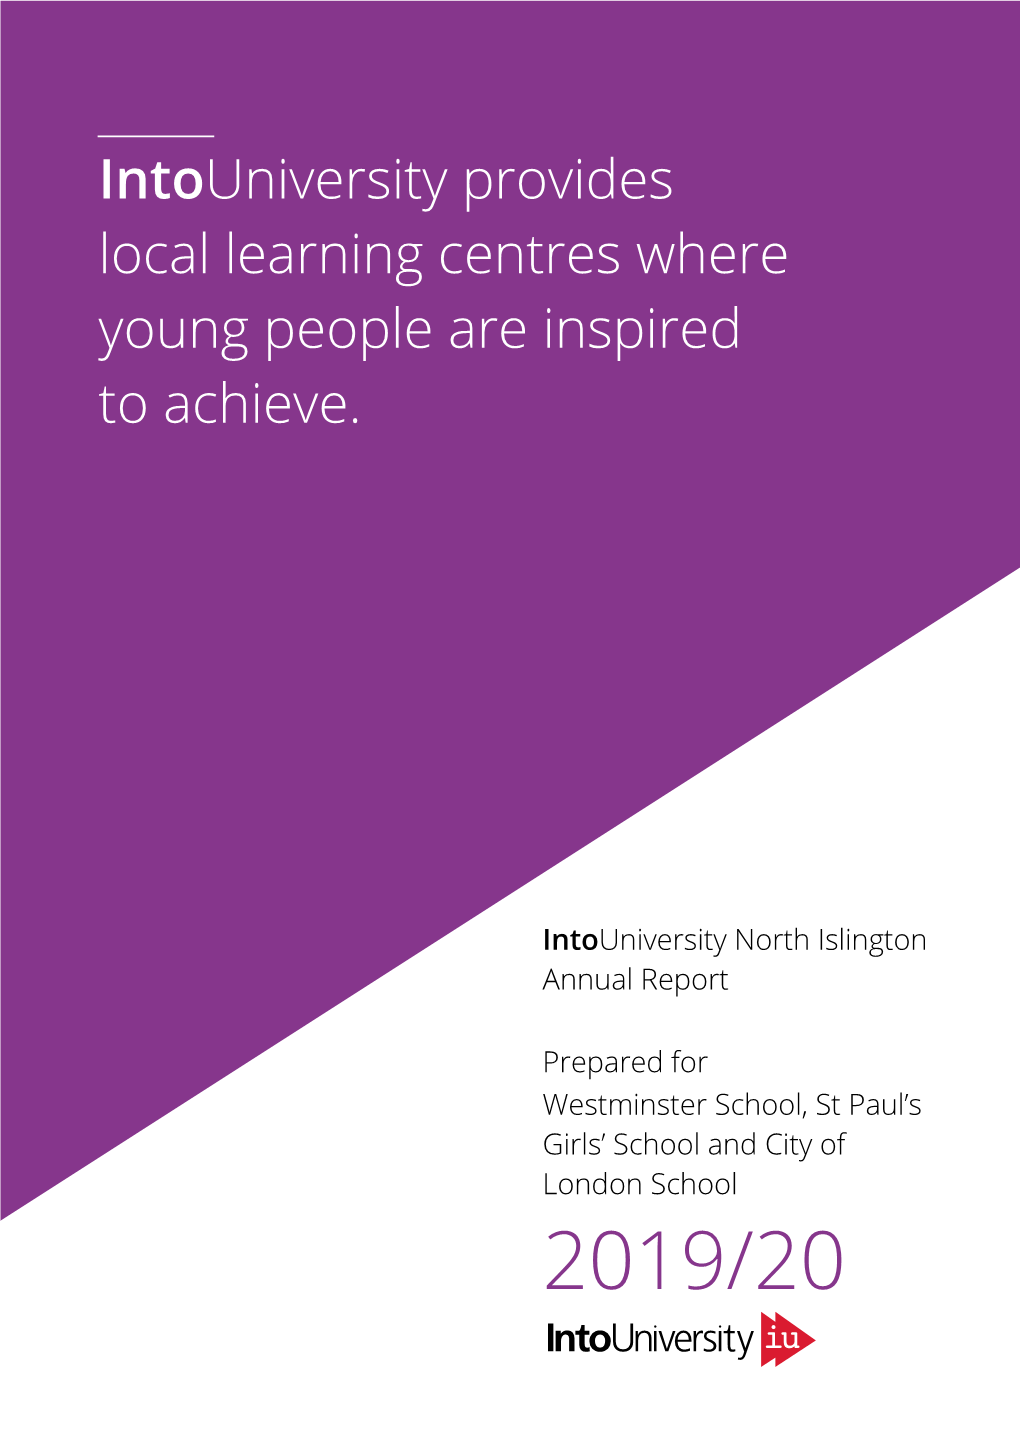 To Read Their North Islington Annual Report